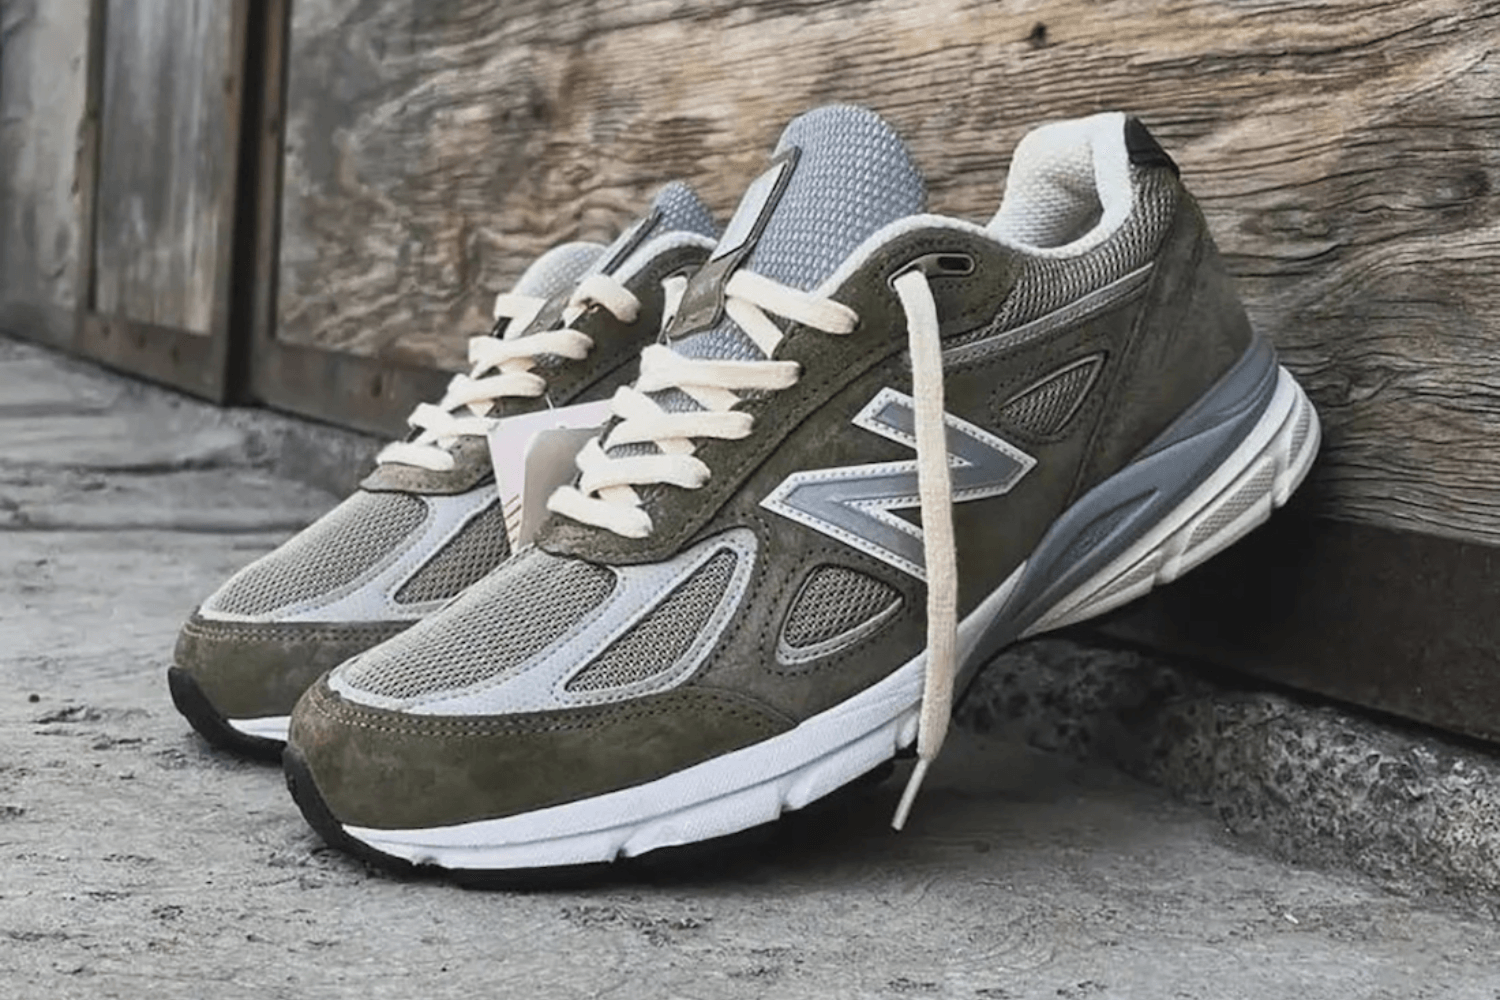 The Aimé Leon Dore x New Balance 990v4 'Olive' is expected in 2024